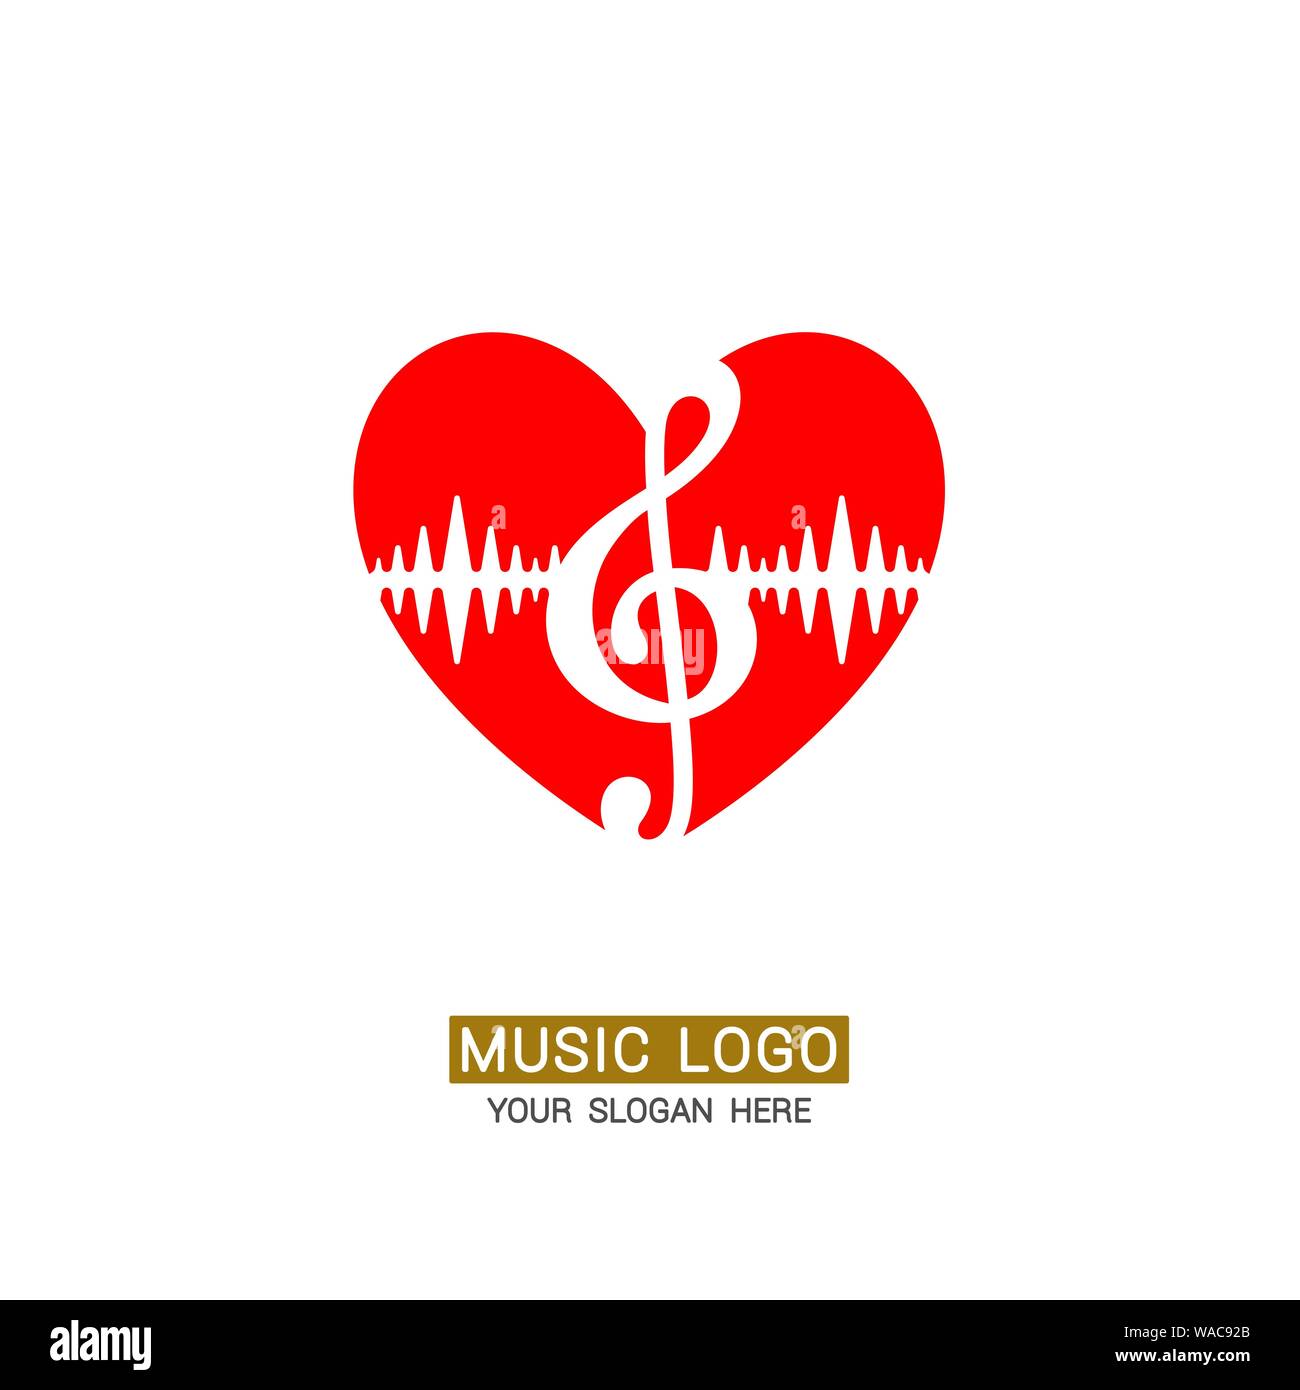 Music logo. Musical heart with treble clef. Stock Vector